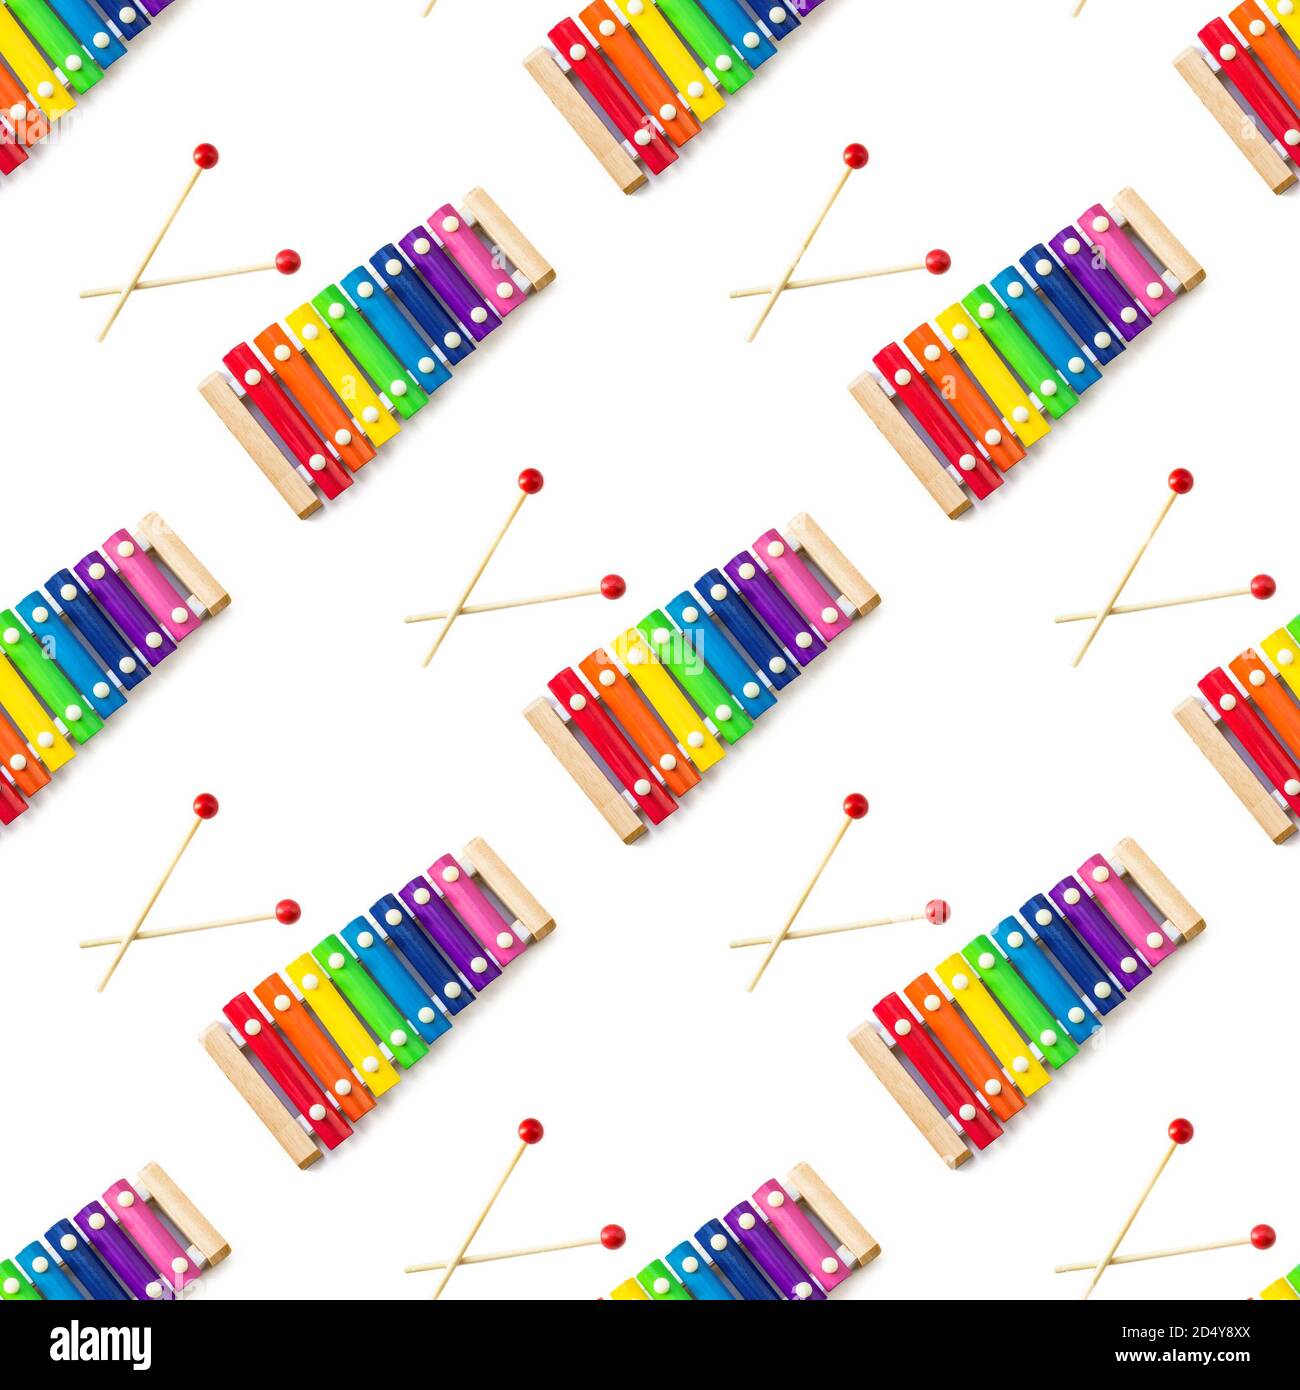 Seamless pattern of Rainbow Colored Wooden Toy 8 tone Xylophone glockenspiel isolated on white background with clipping path. toy glockenspiel made of Stock Photo